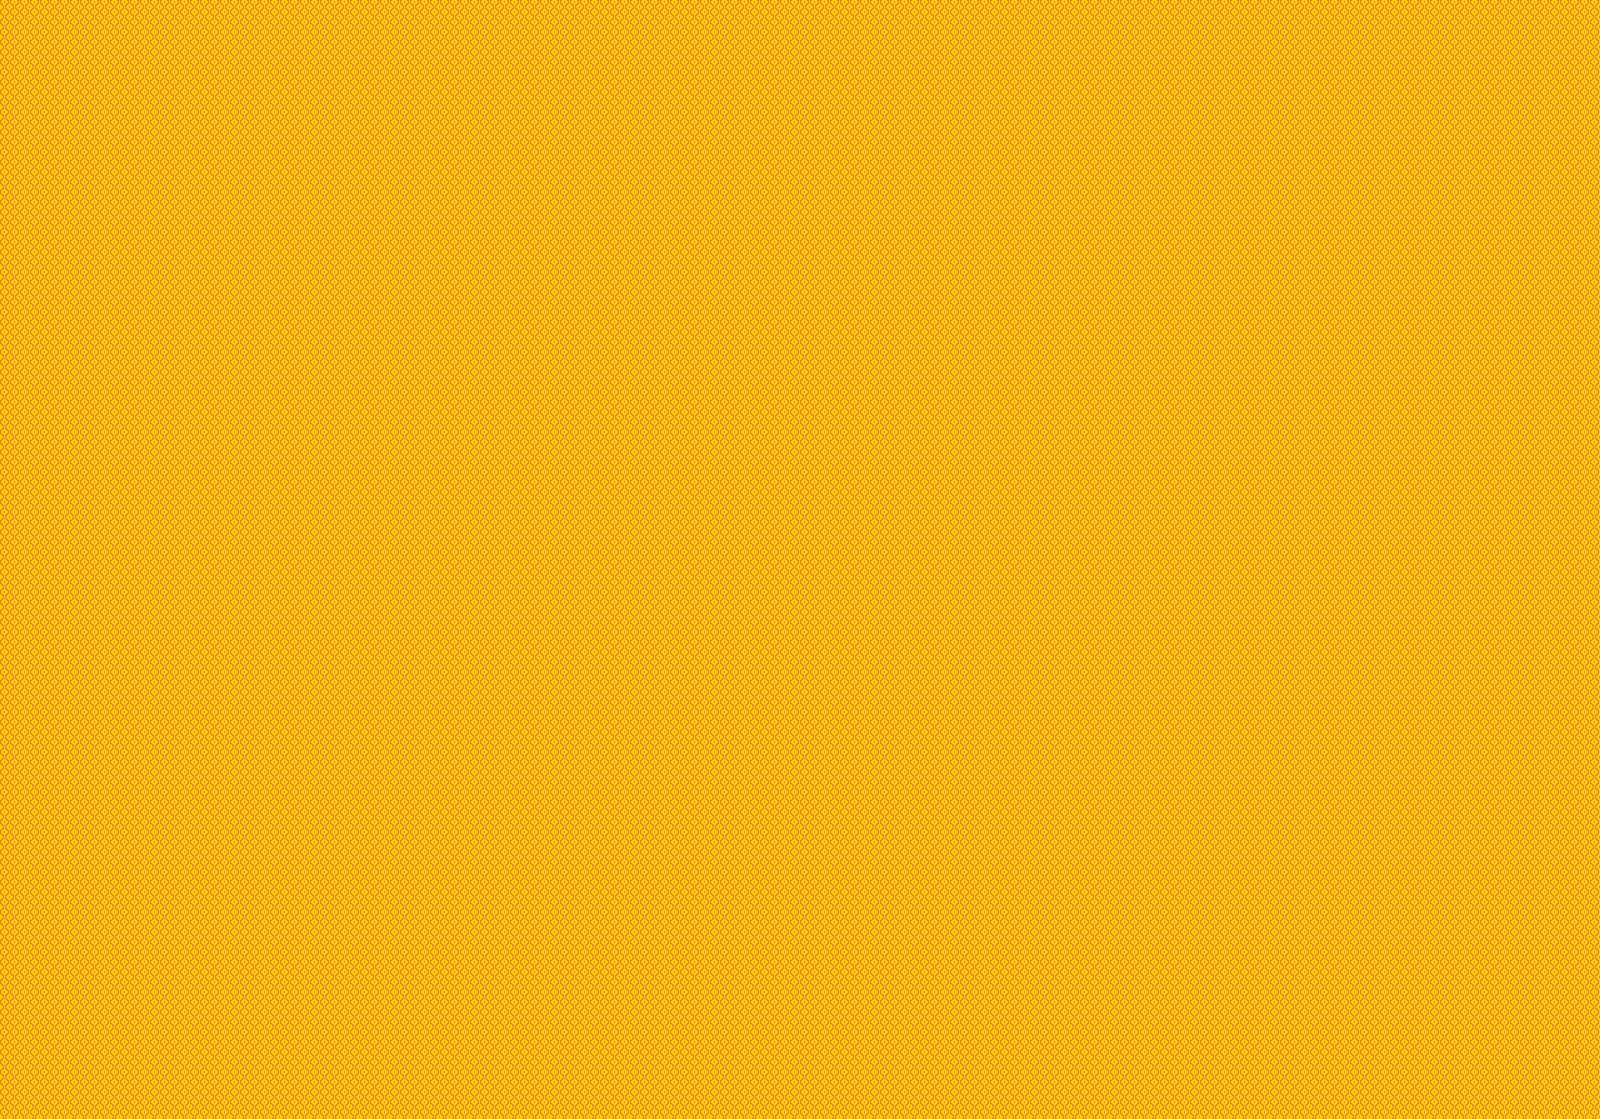 Popular Yellow Image for Phone